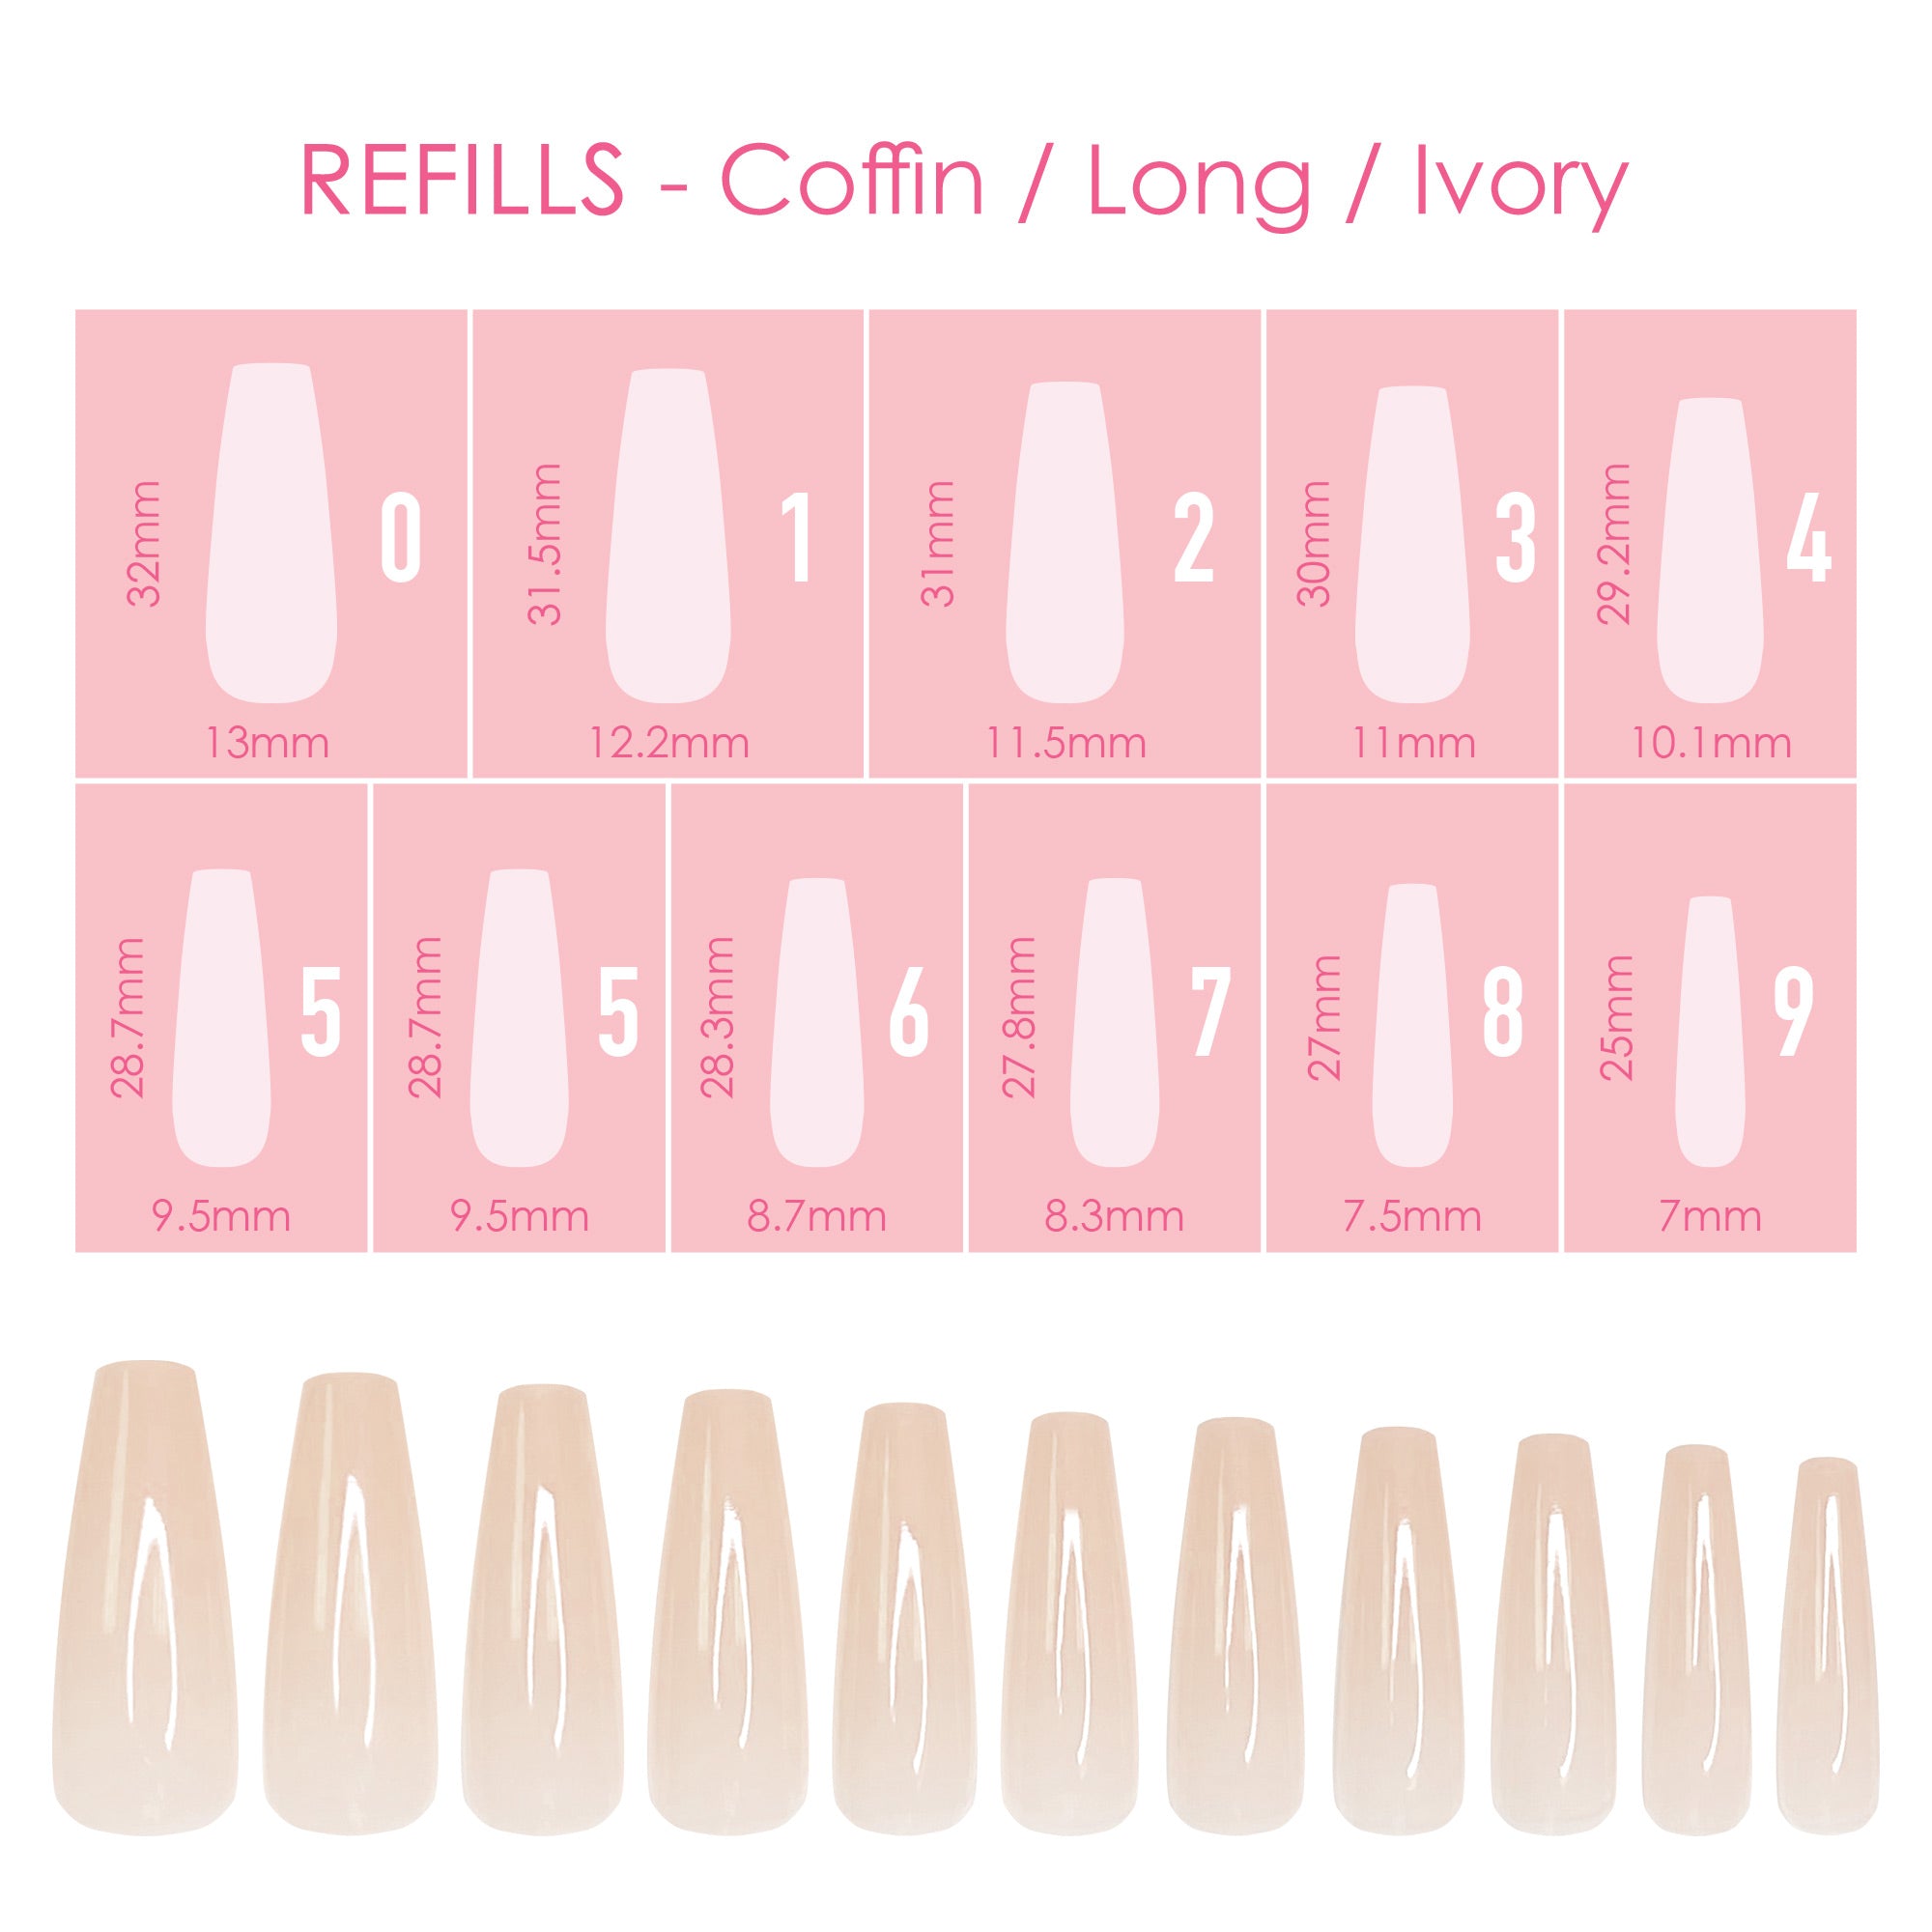 Charme Gel Extension Tips Refill / Coffin / Long / Ivory